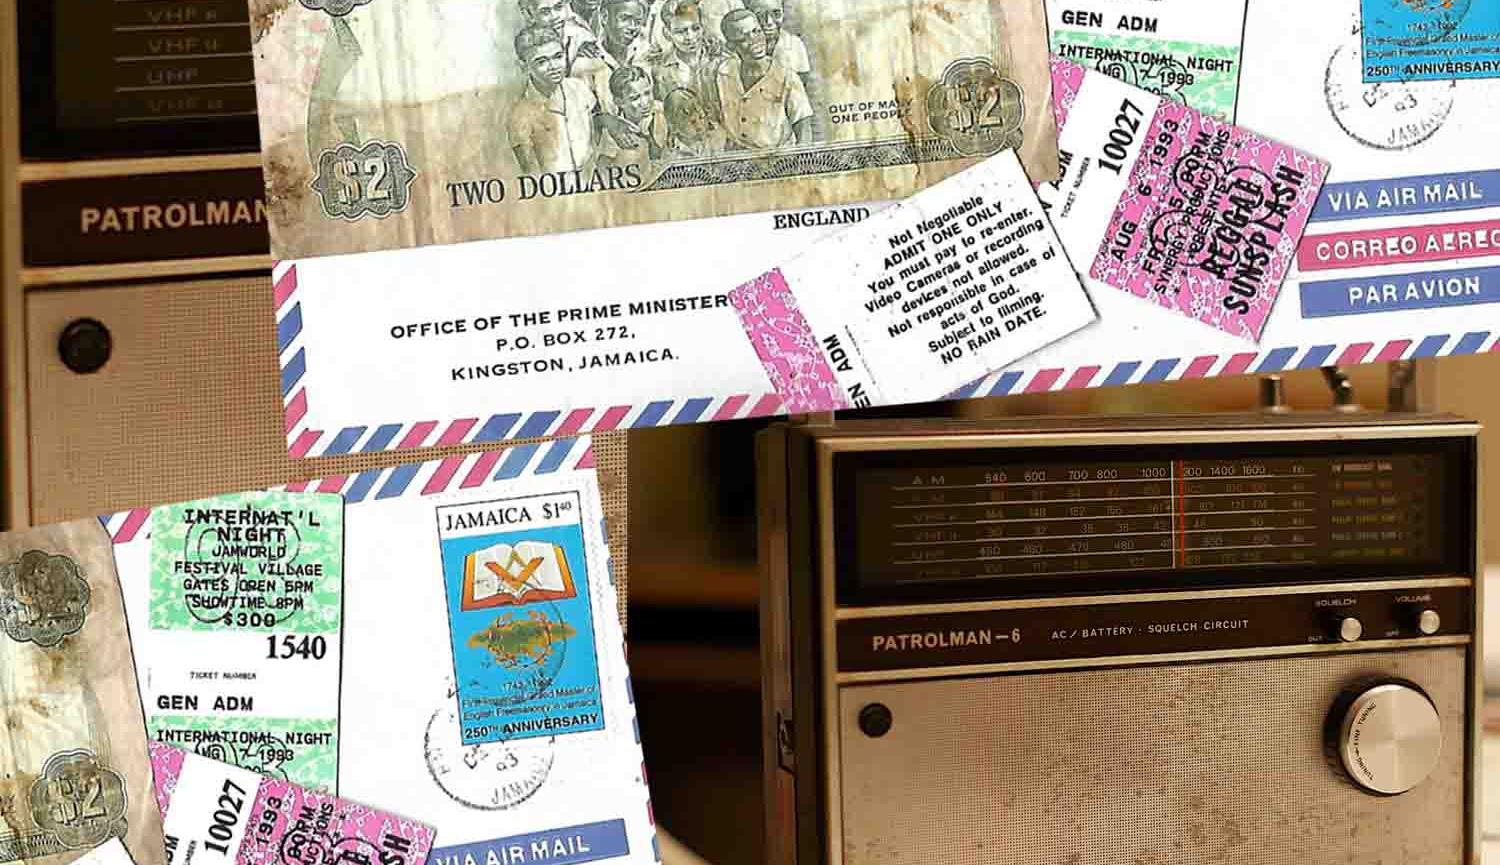 Sepia photo of old radio, image of air mail envelope with stamp, Jamaican two dollar note and tickets